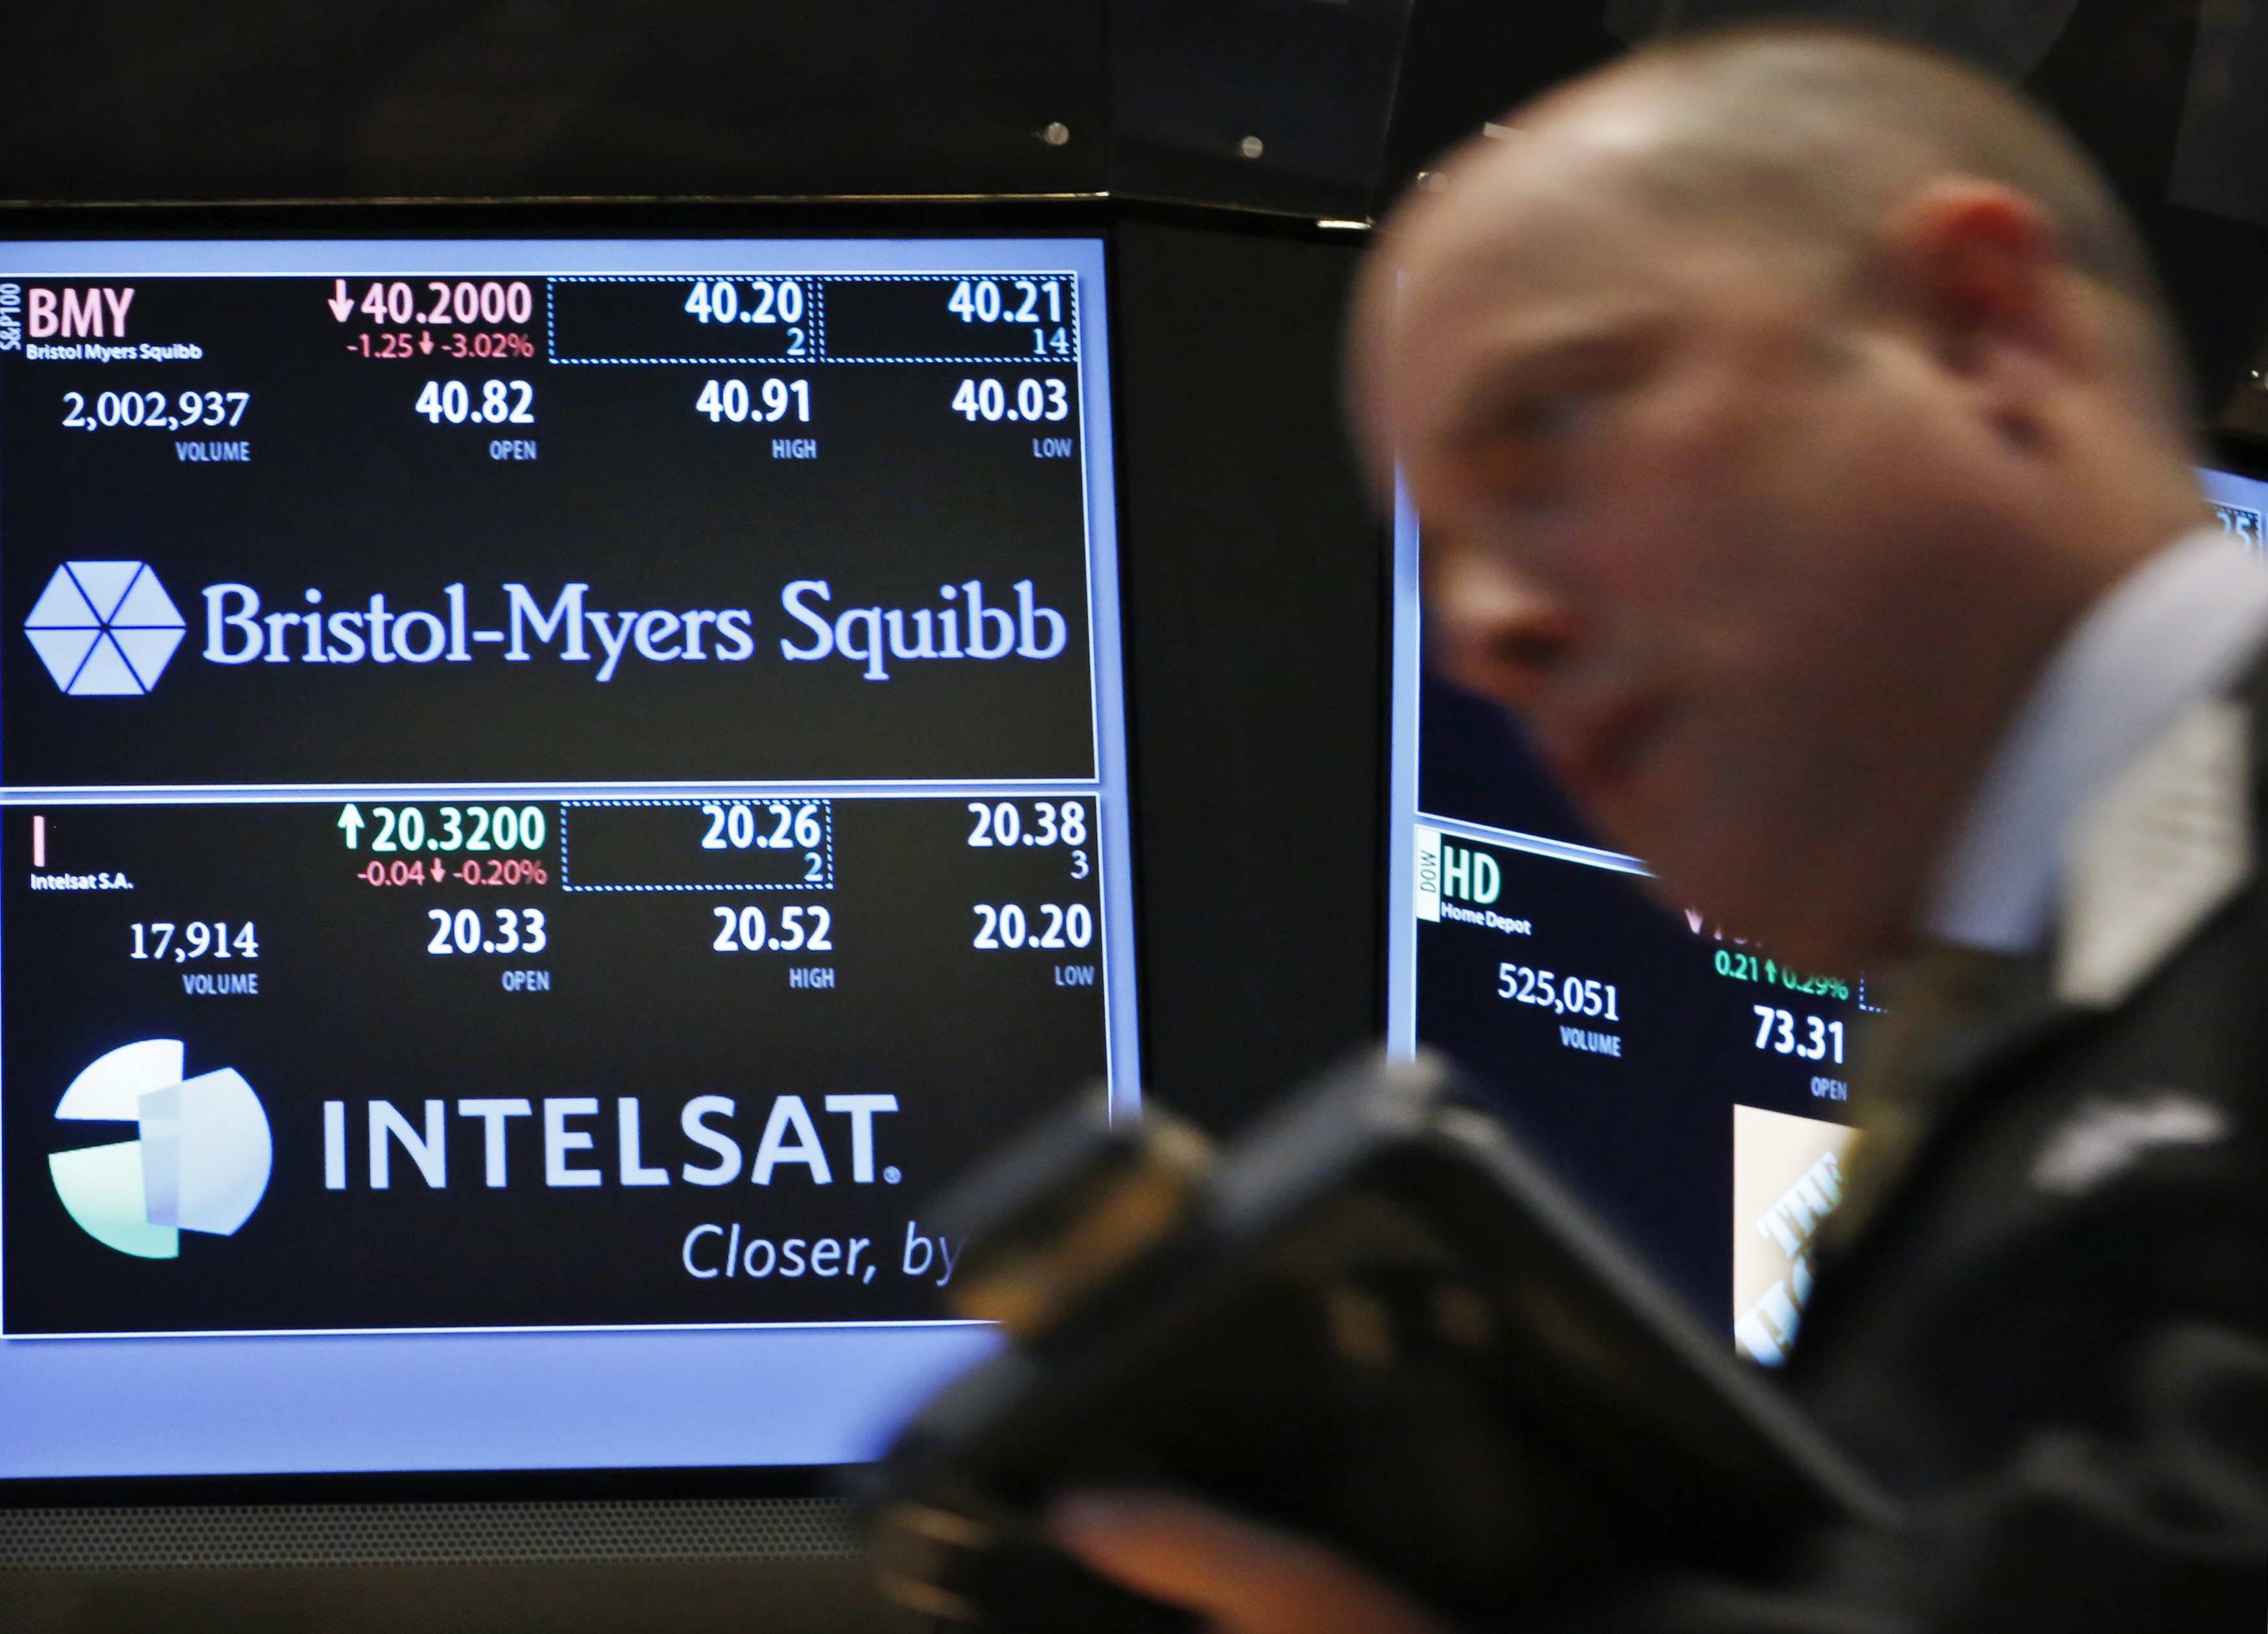 A trader passes by a screen displaying the tickers symbols for Bristol-Myers Squibb and Intelsat, Ltd. on the floor at the New York Stock Exchange